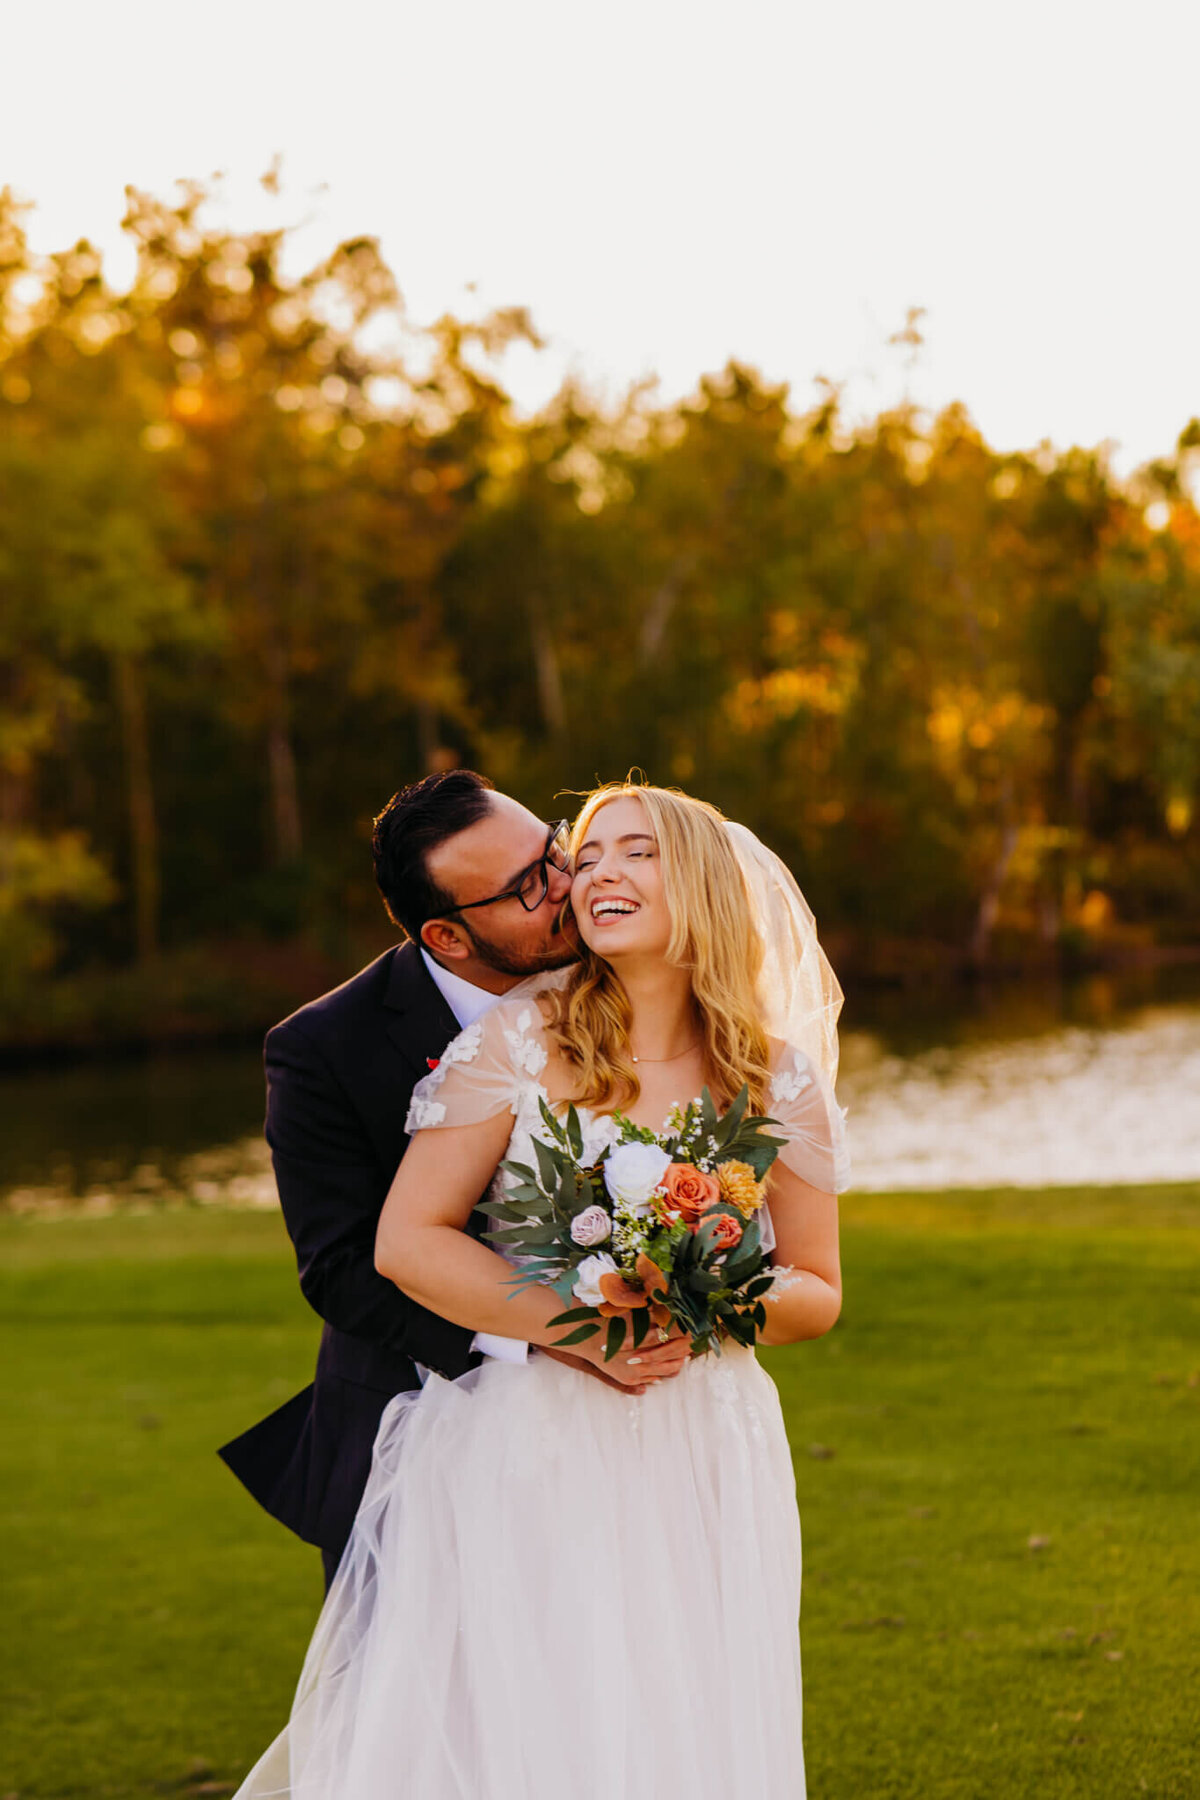 photo of a bride laughing while the groom hugs her from behind and kisses her cheek